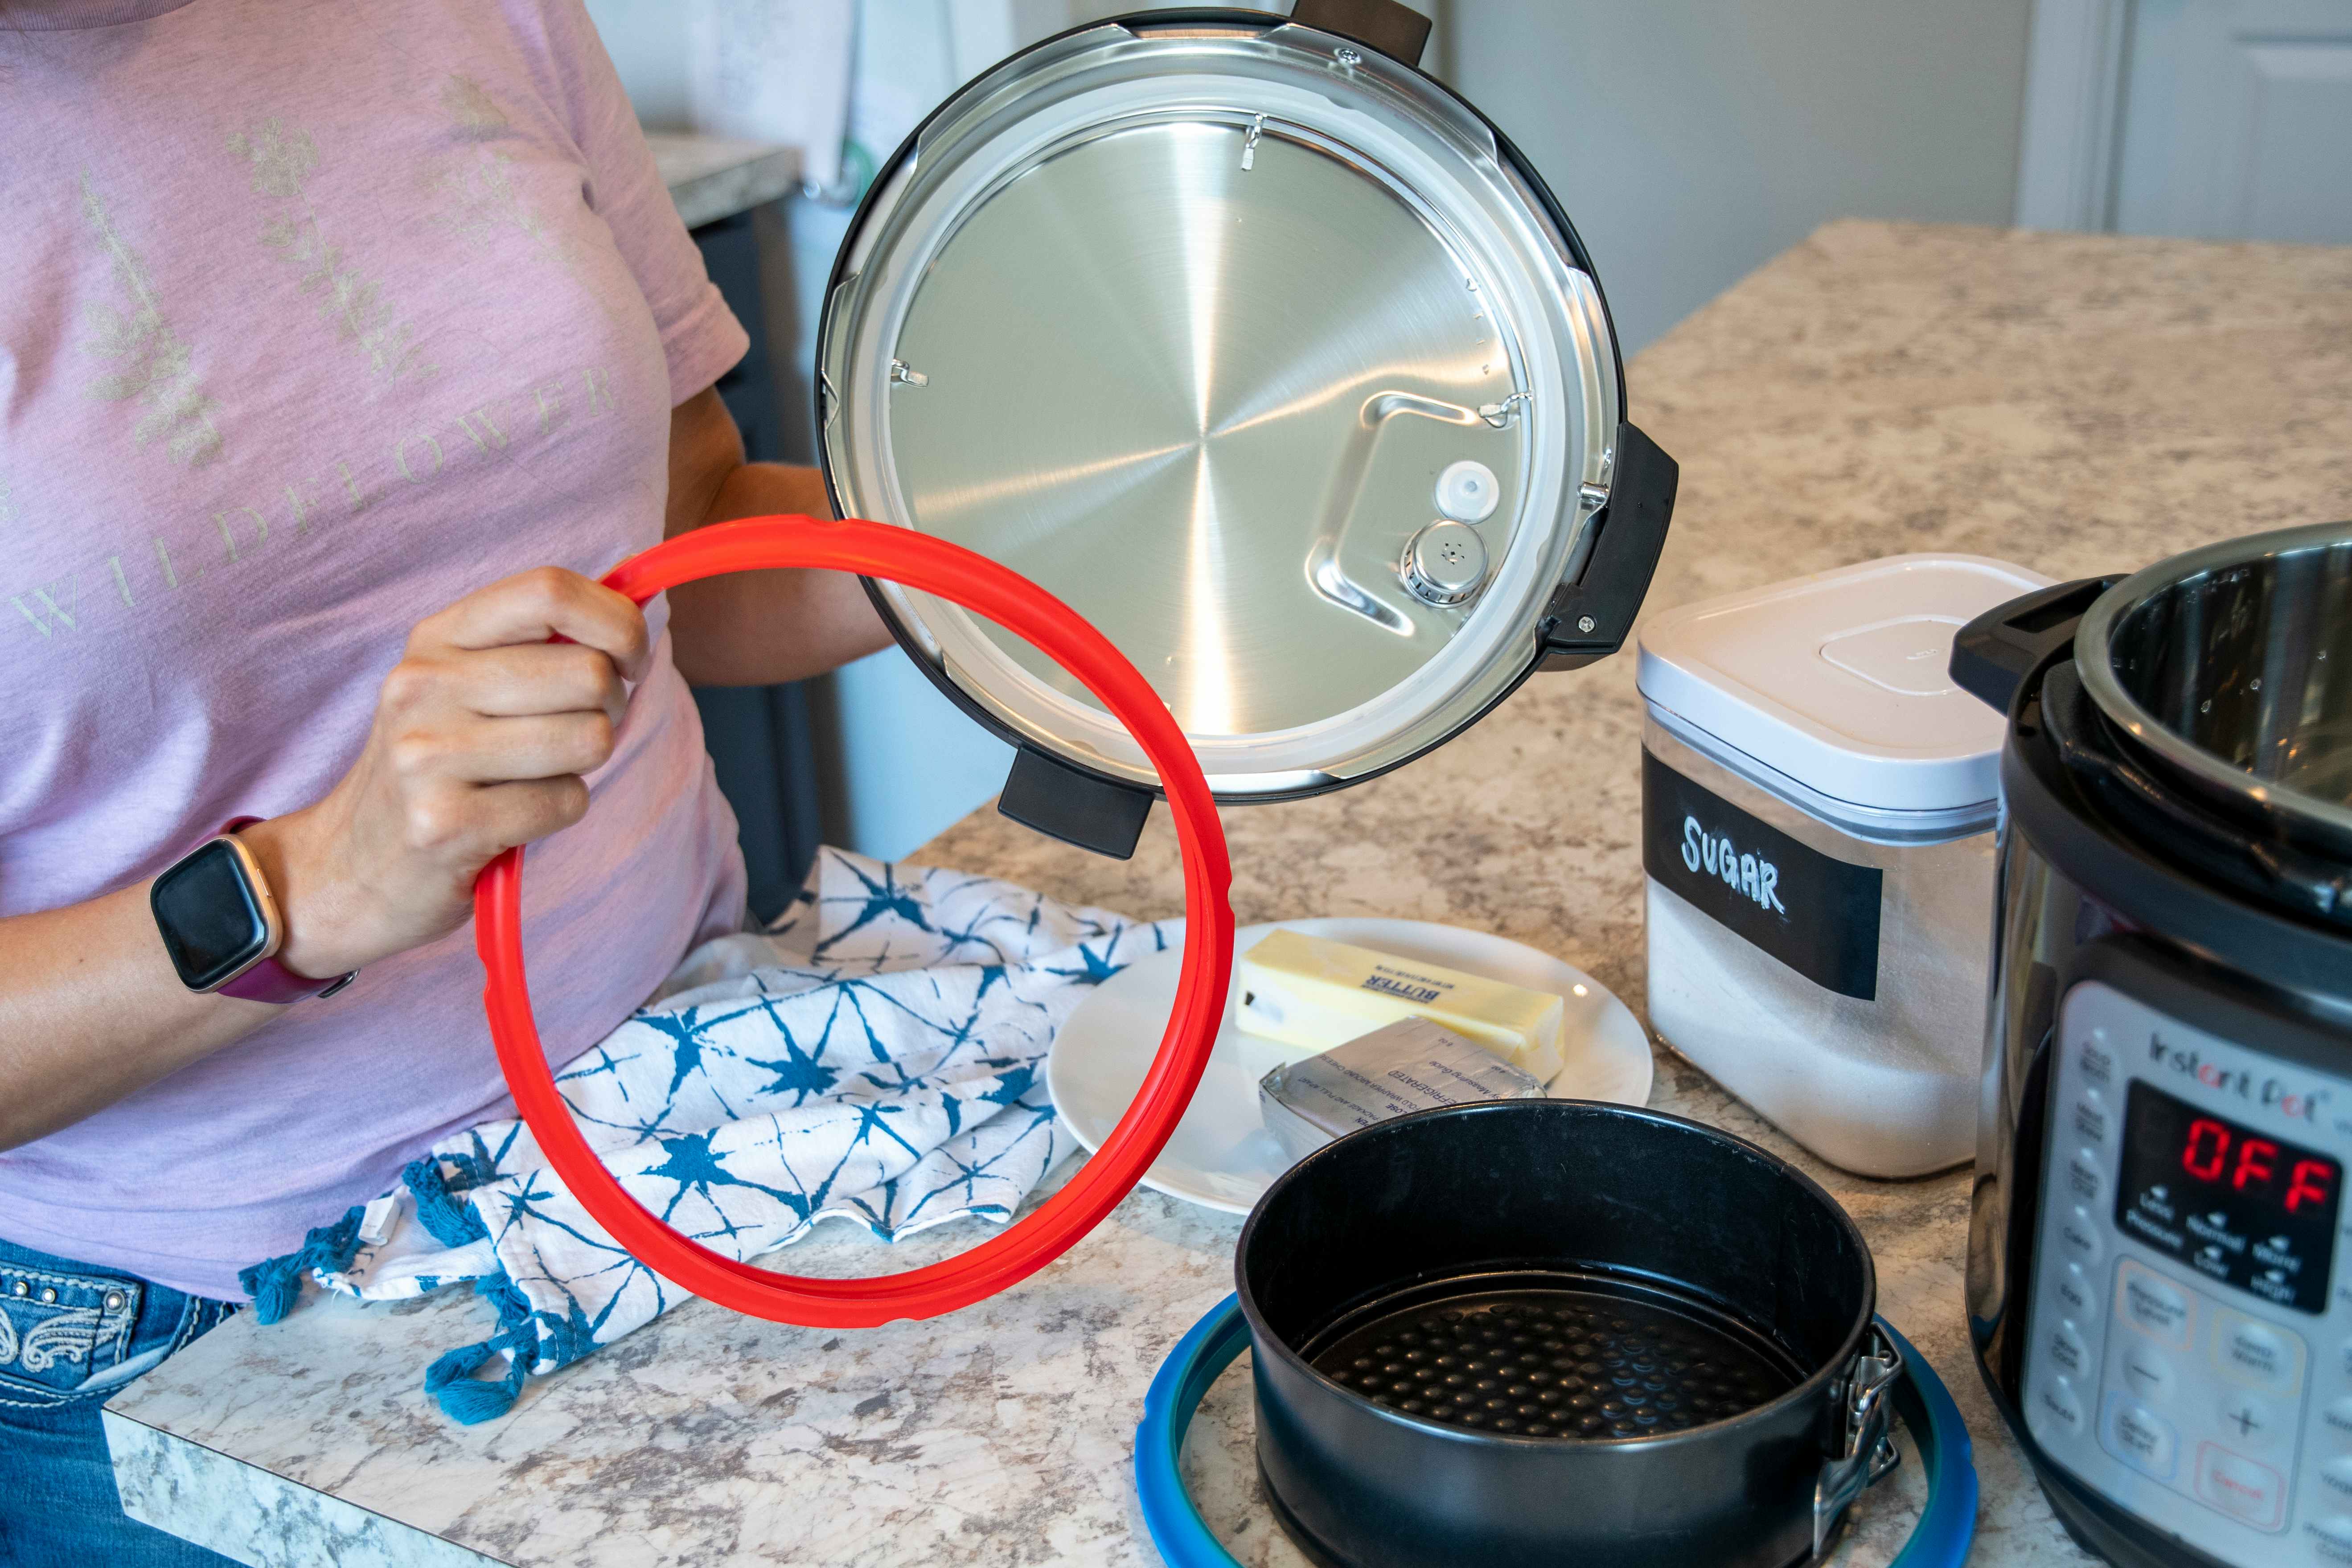 How to Use the Instant Pot: Basics & Common Mistakes - Krazy Coupon Lady -  The Krazy Coupon Lady